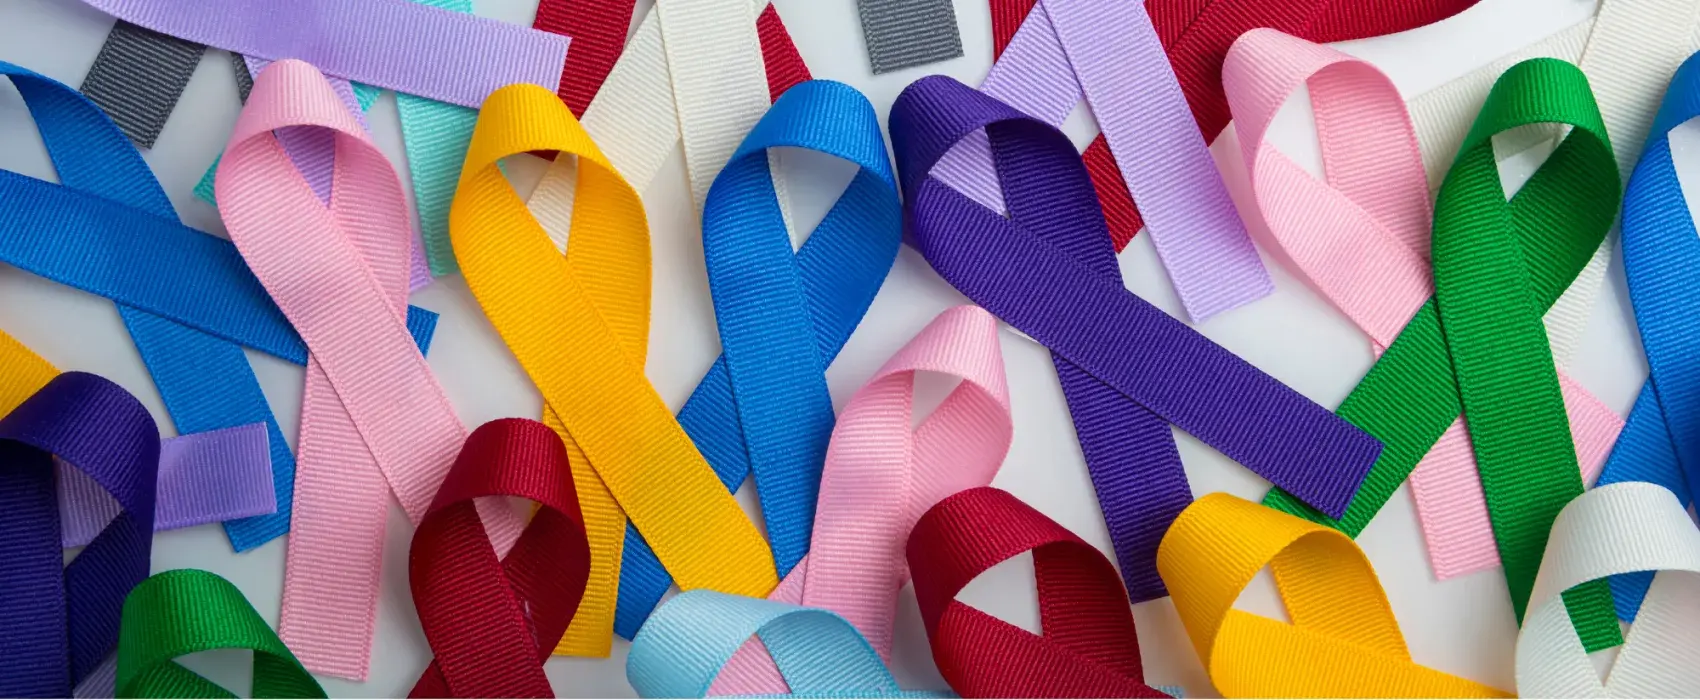 Assortment of different cancer ribbons